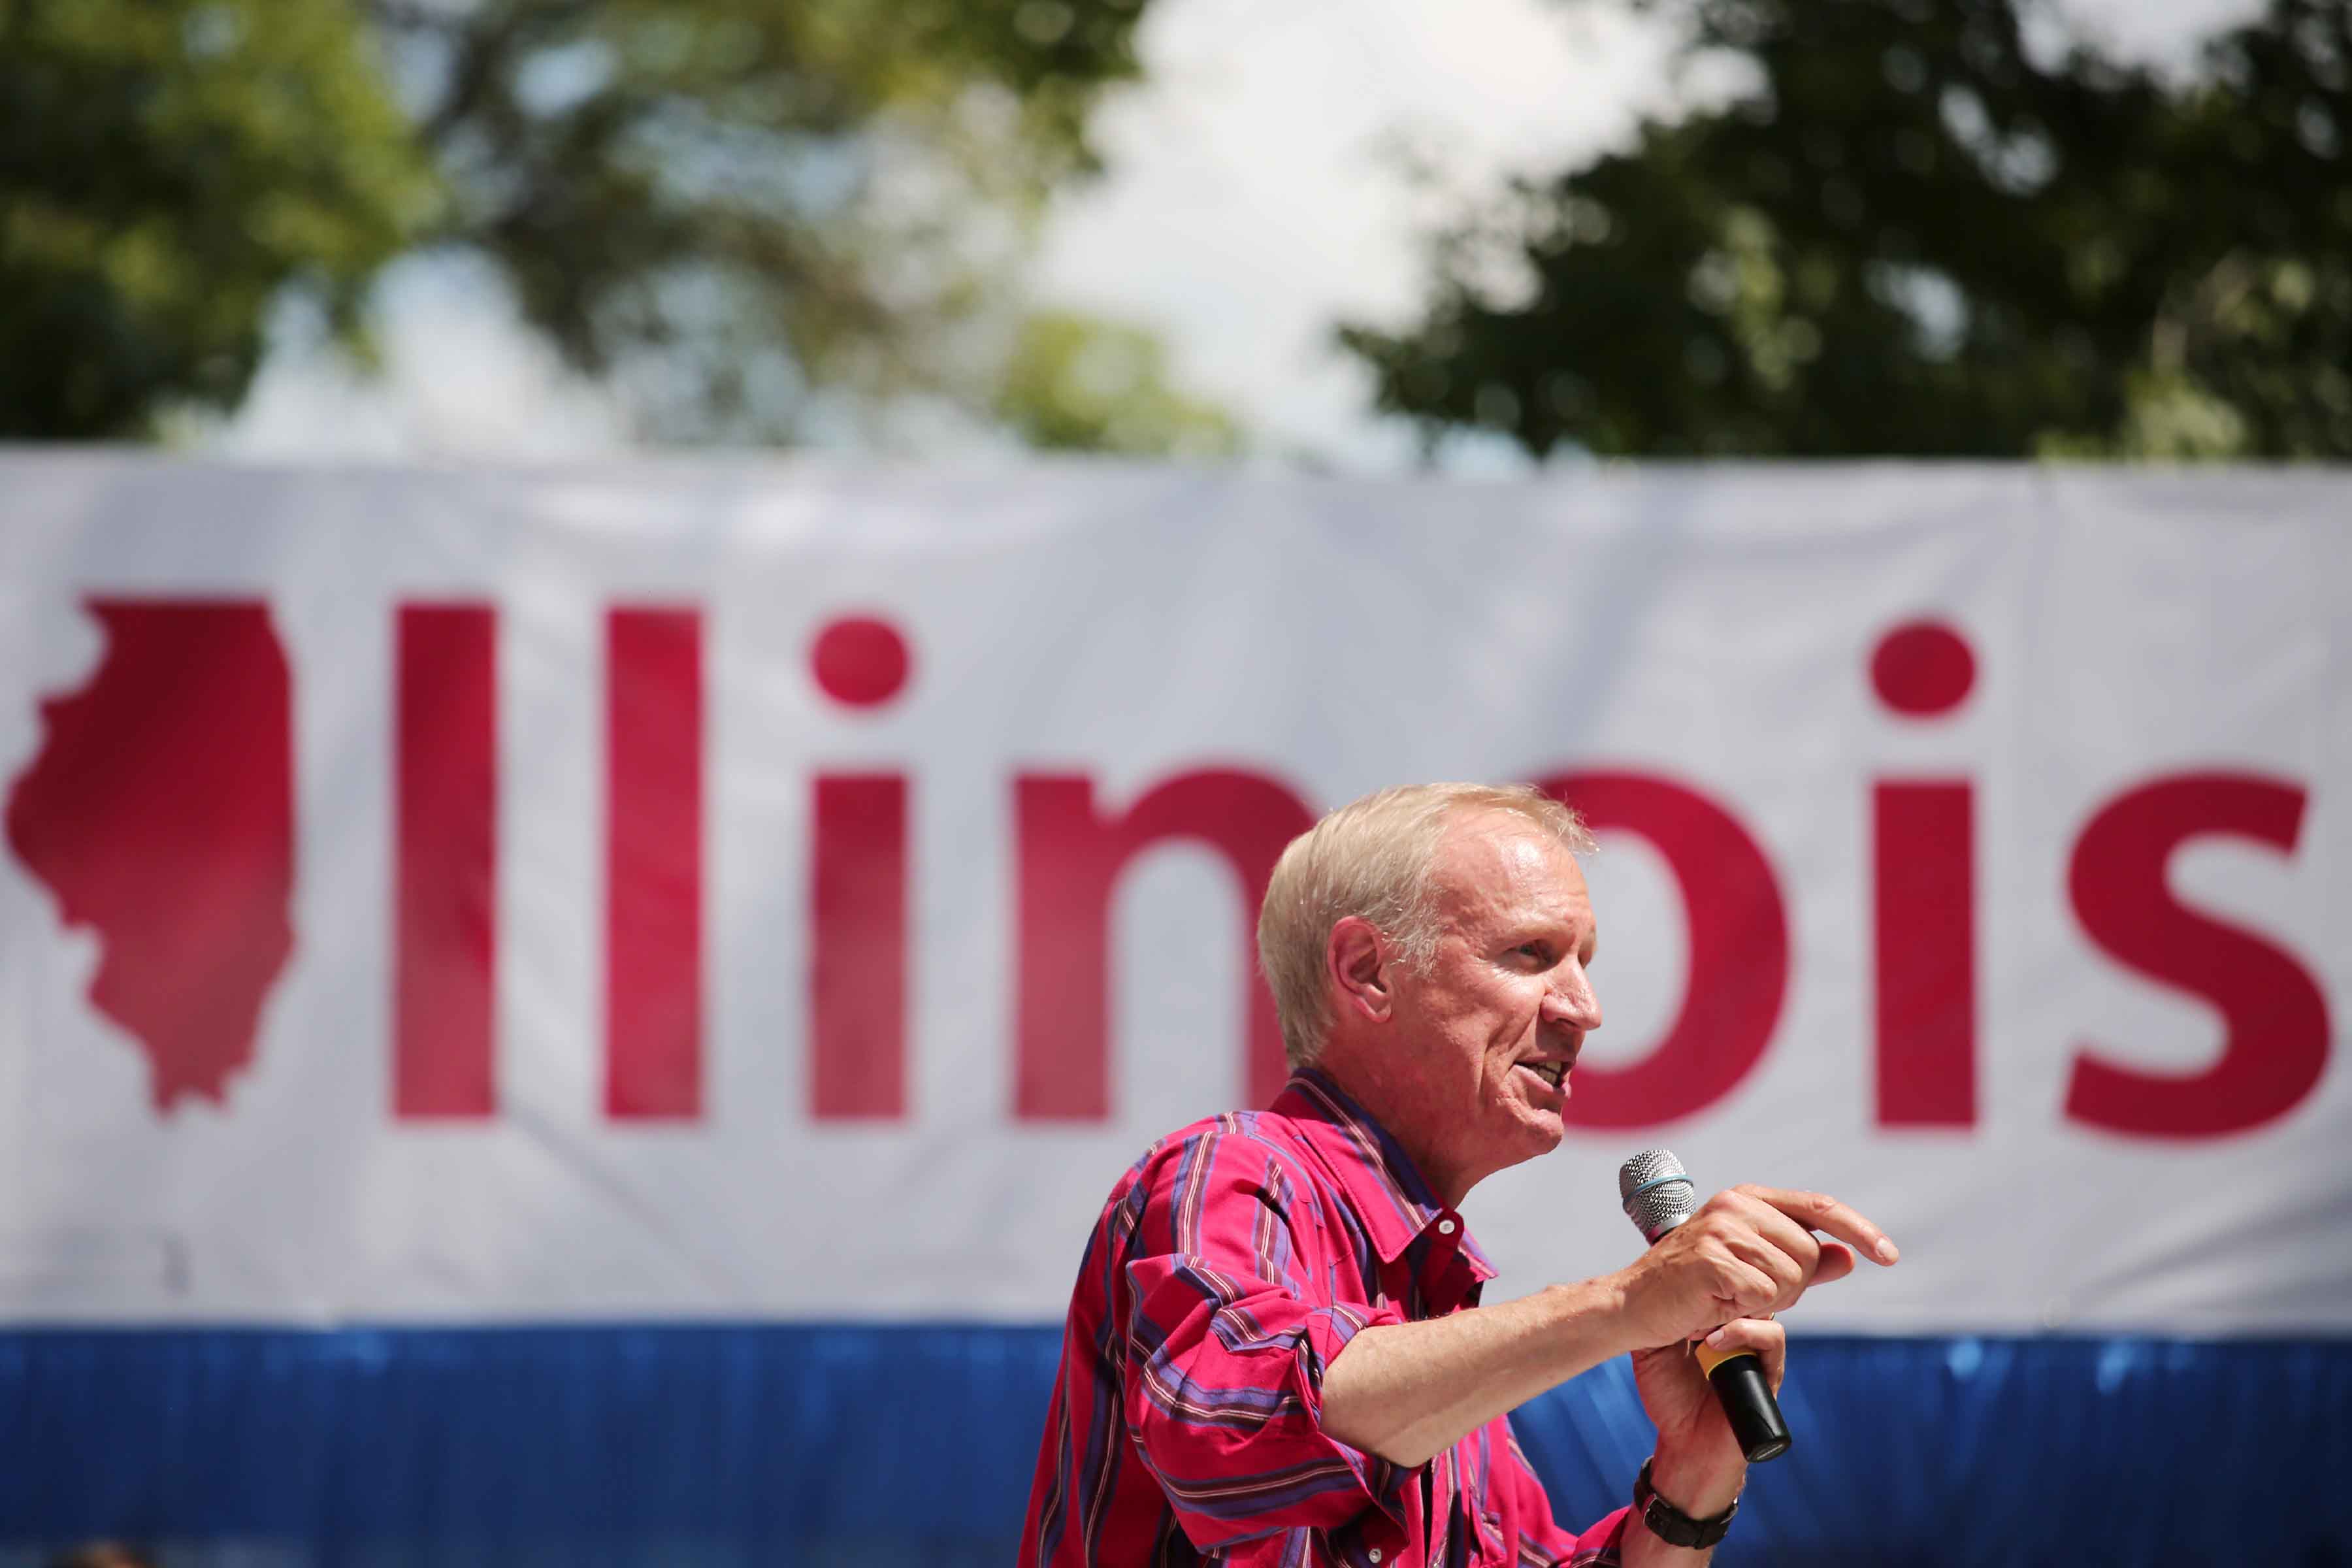 Illinois Gov. Bruce Rauner speaks at the Illinois State Fair in Springfield on Aug. 17, 2016. (Anthony Souffle/Chicago Tribune/TNS)